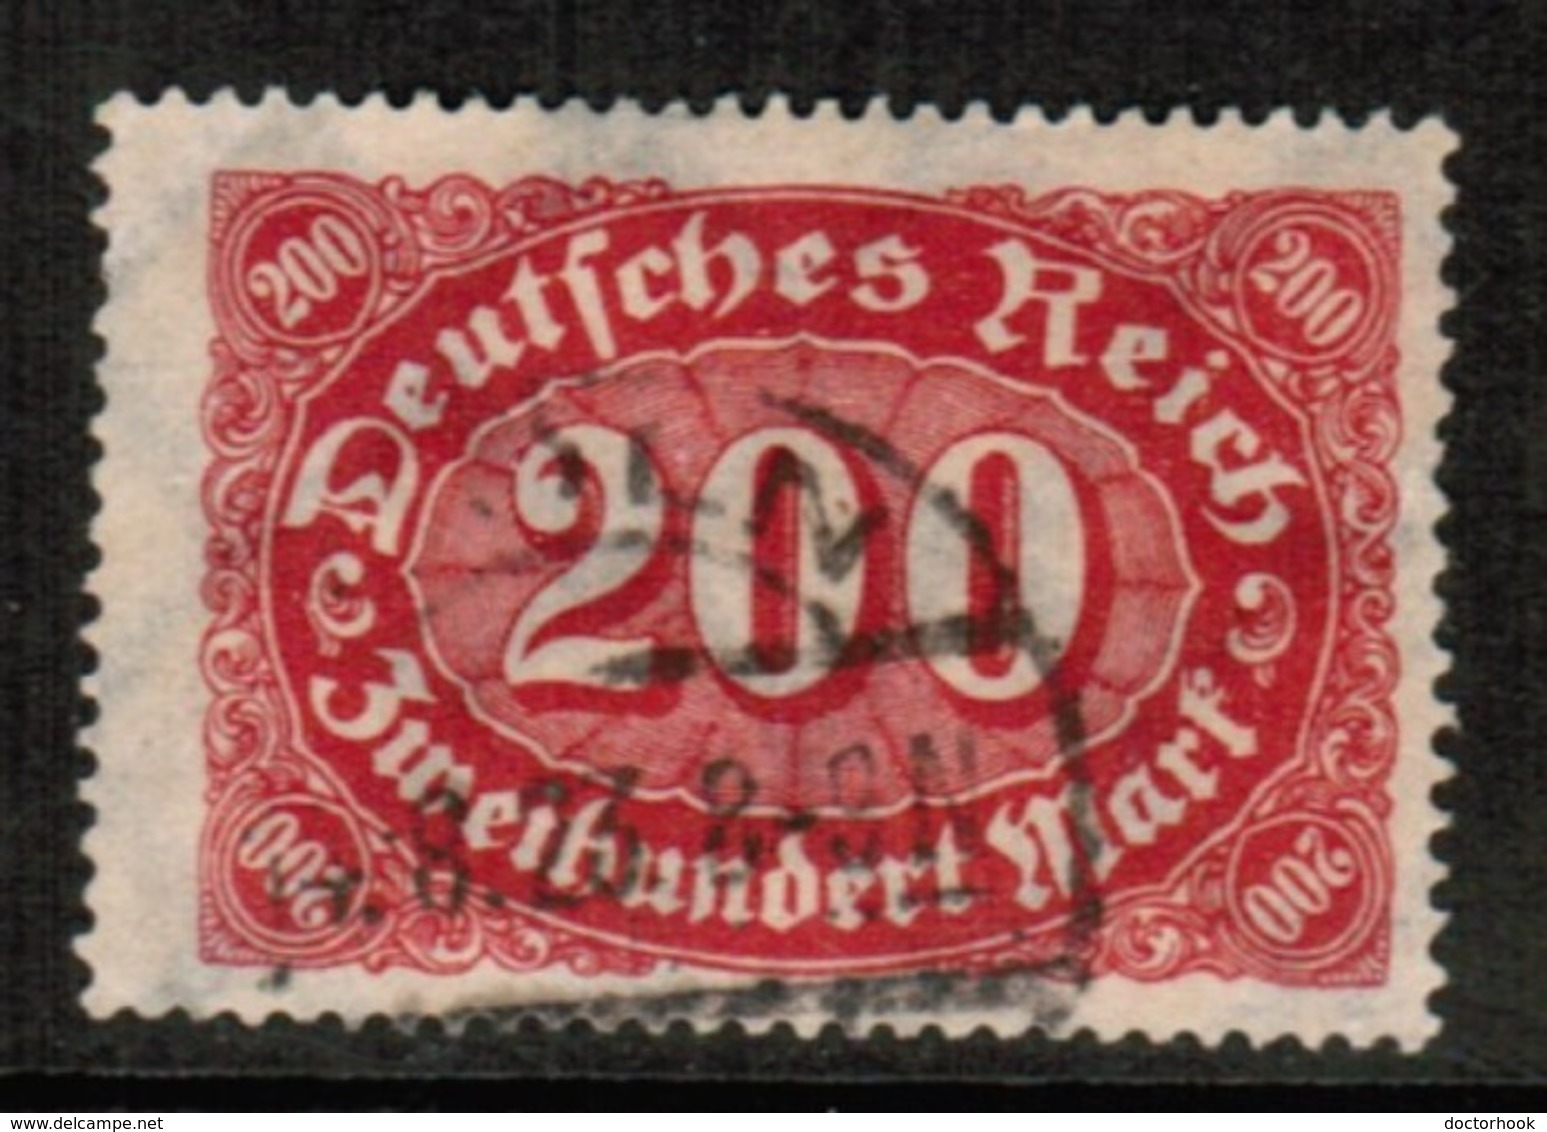 GERMANY  Scott # 200 VF USED (Stamp Scan # 459) - Used Stamps